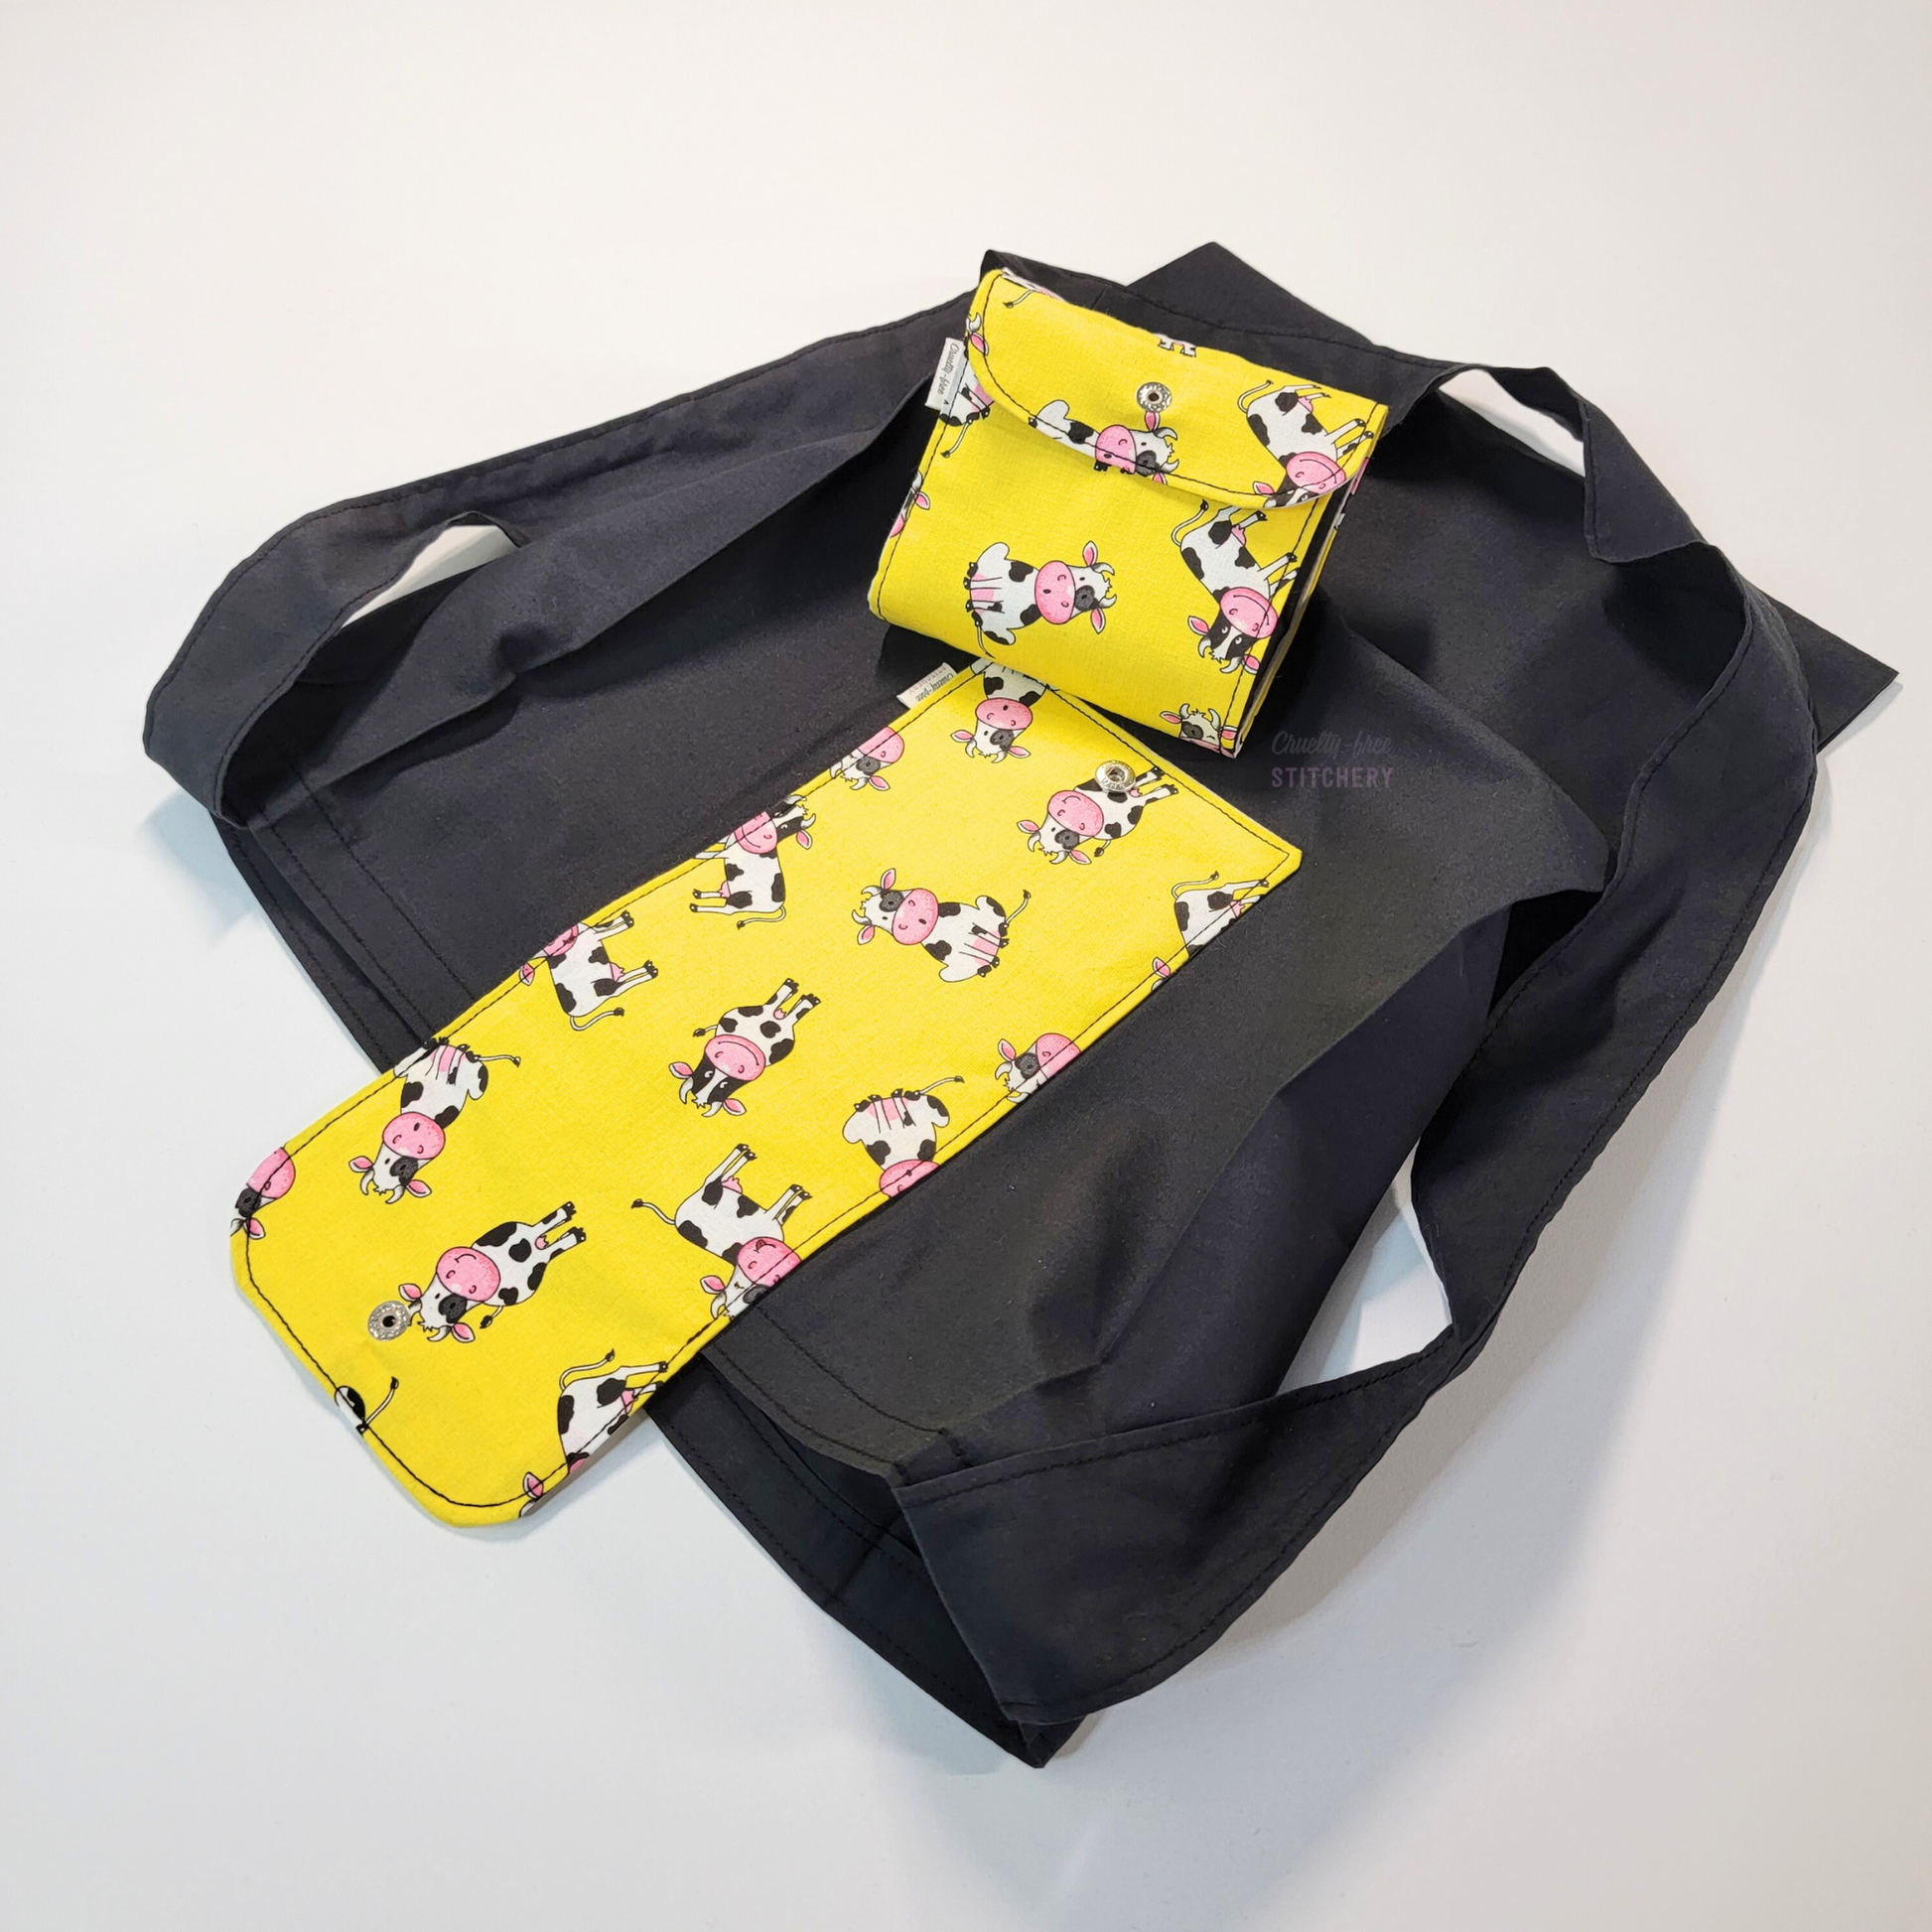 A solid black tote bag with a long strap and a bright yellow flap printed with cute smiling sketched cows in various poses. On top of the bag is another bag that has been folded up and snapped together like a wallet.